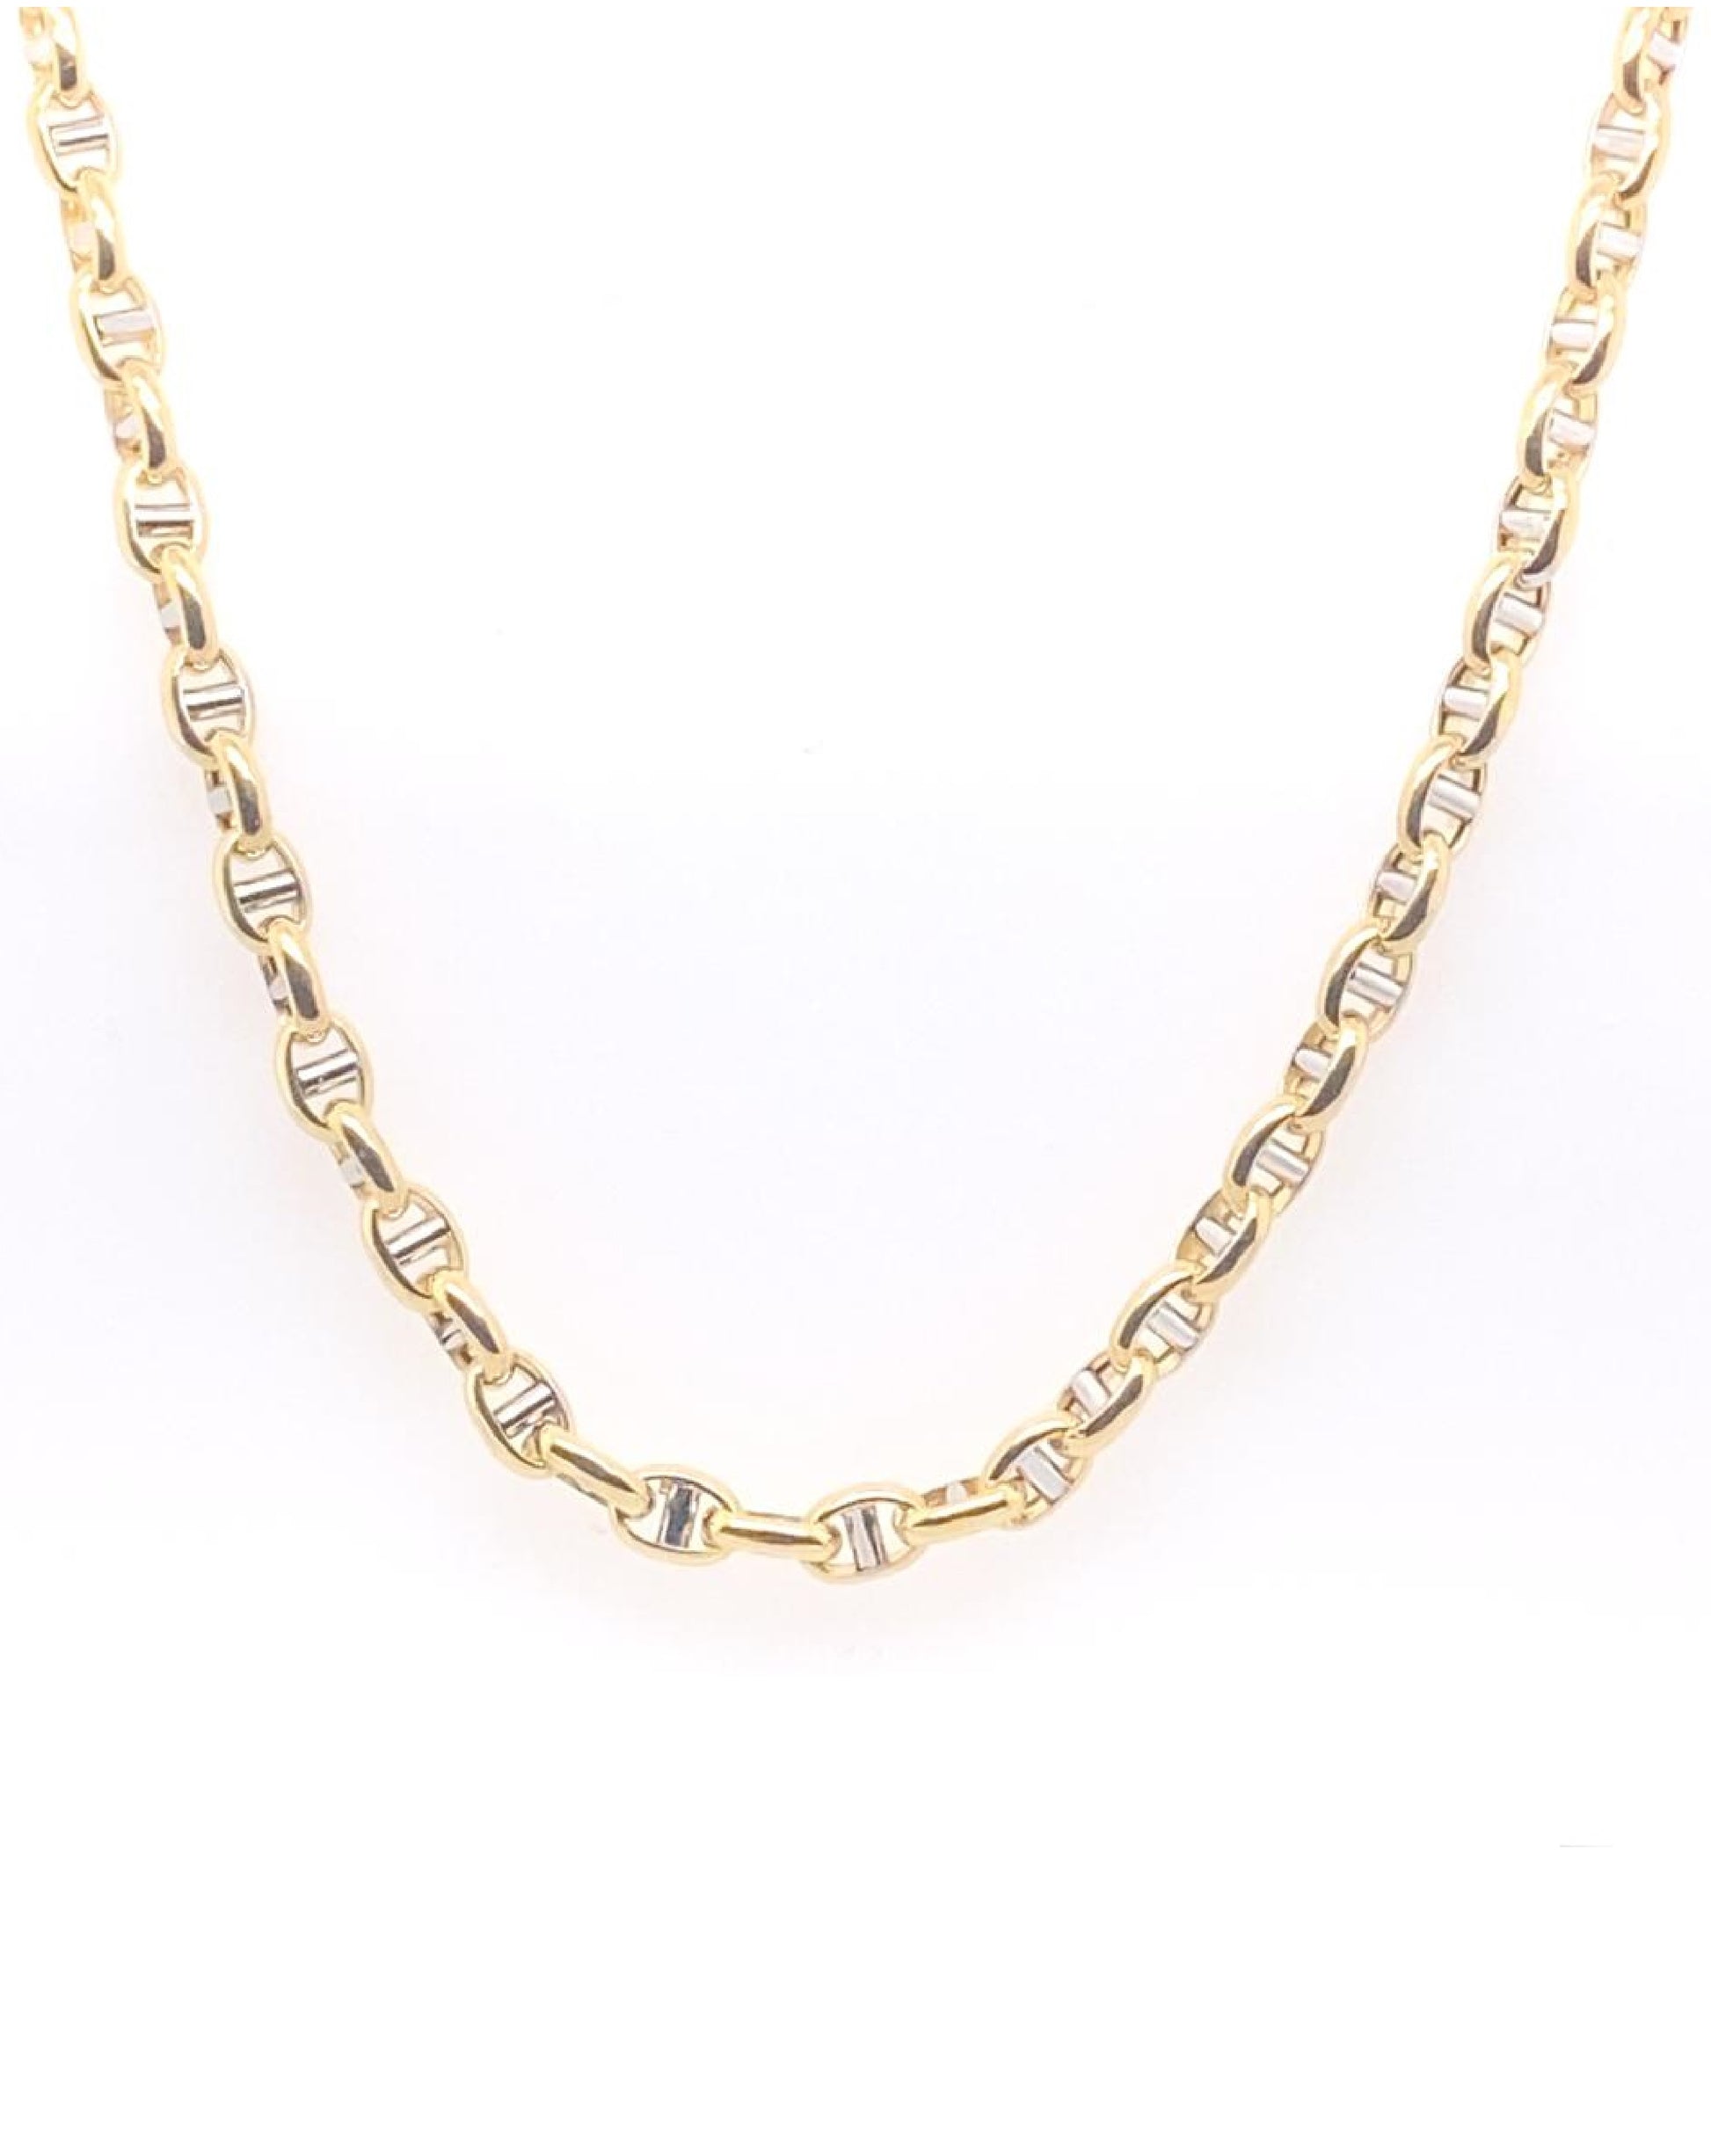 Gold 18 kt Yellow/White Two - Tone Gold Links Chain 60Cms 750mls Jewelry